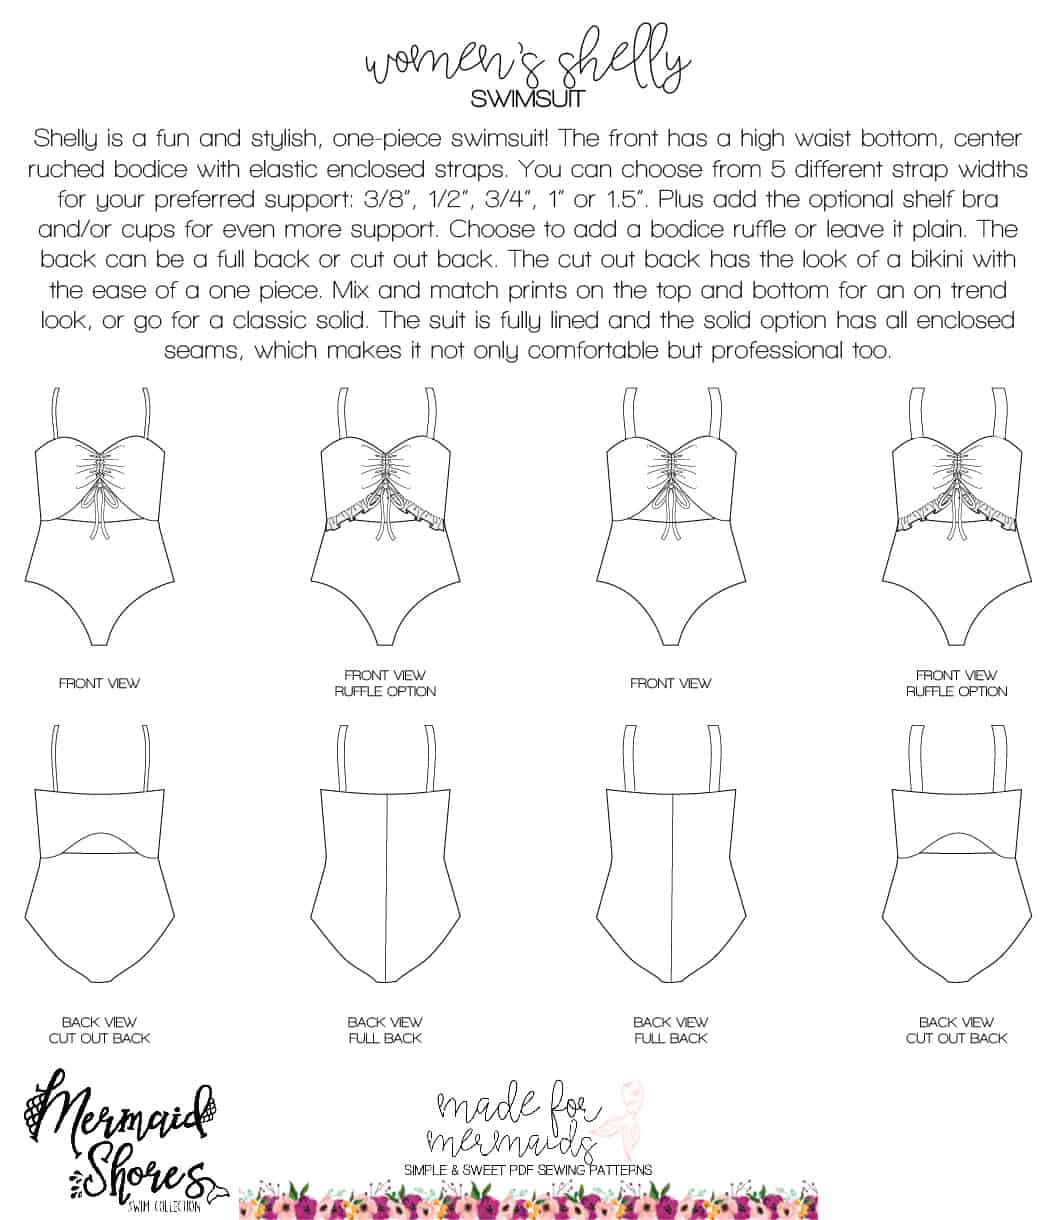 Mermaid Shores Collection: Women's Shelly Swimsuit